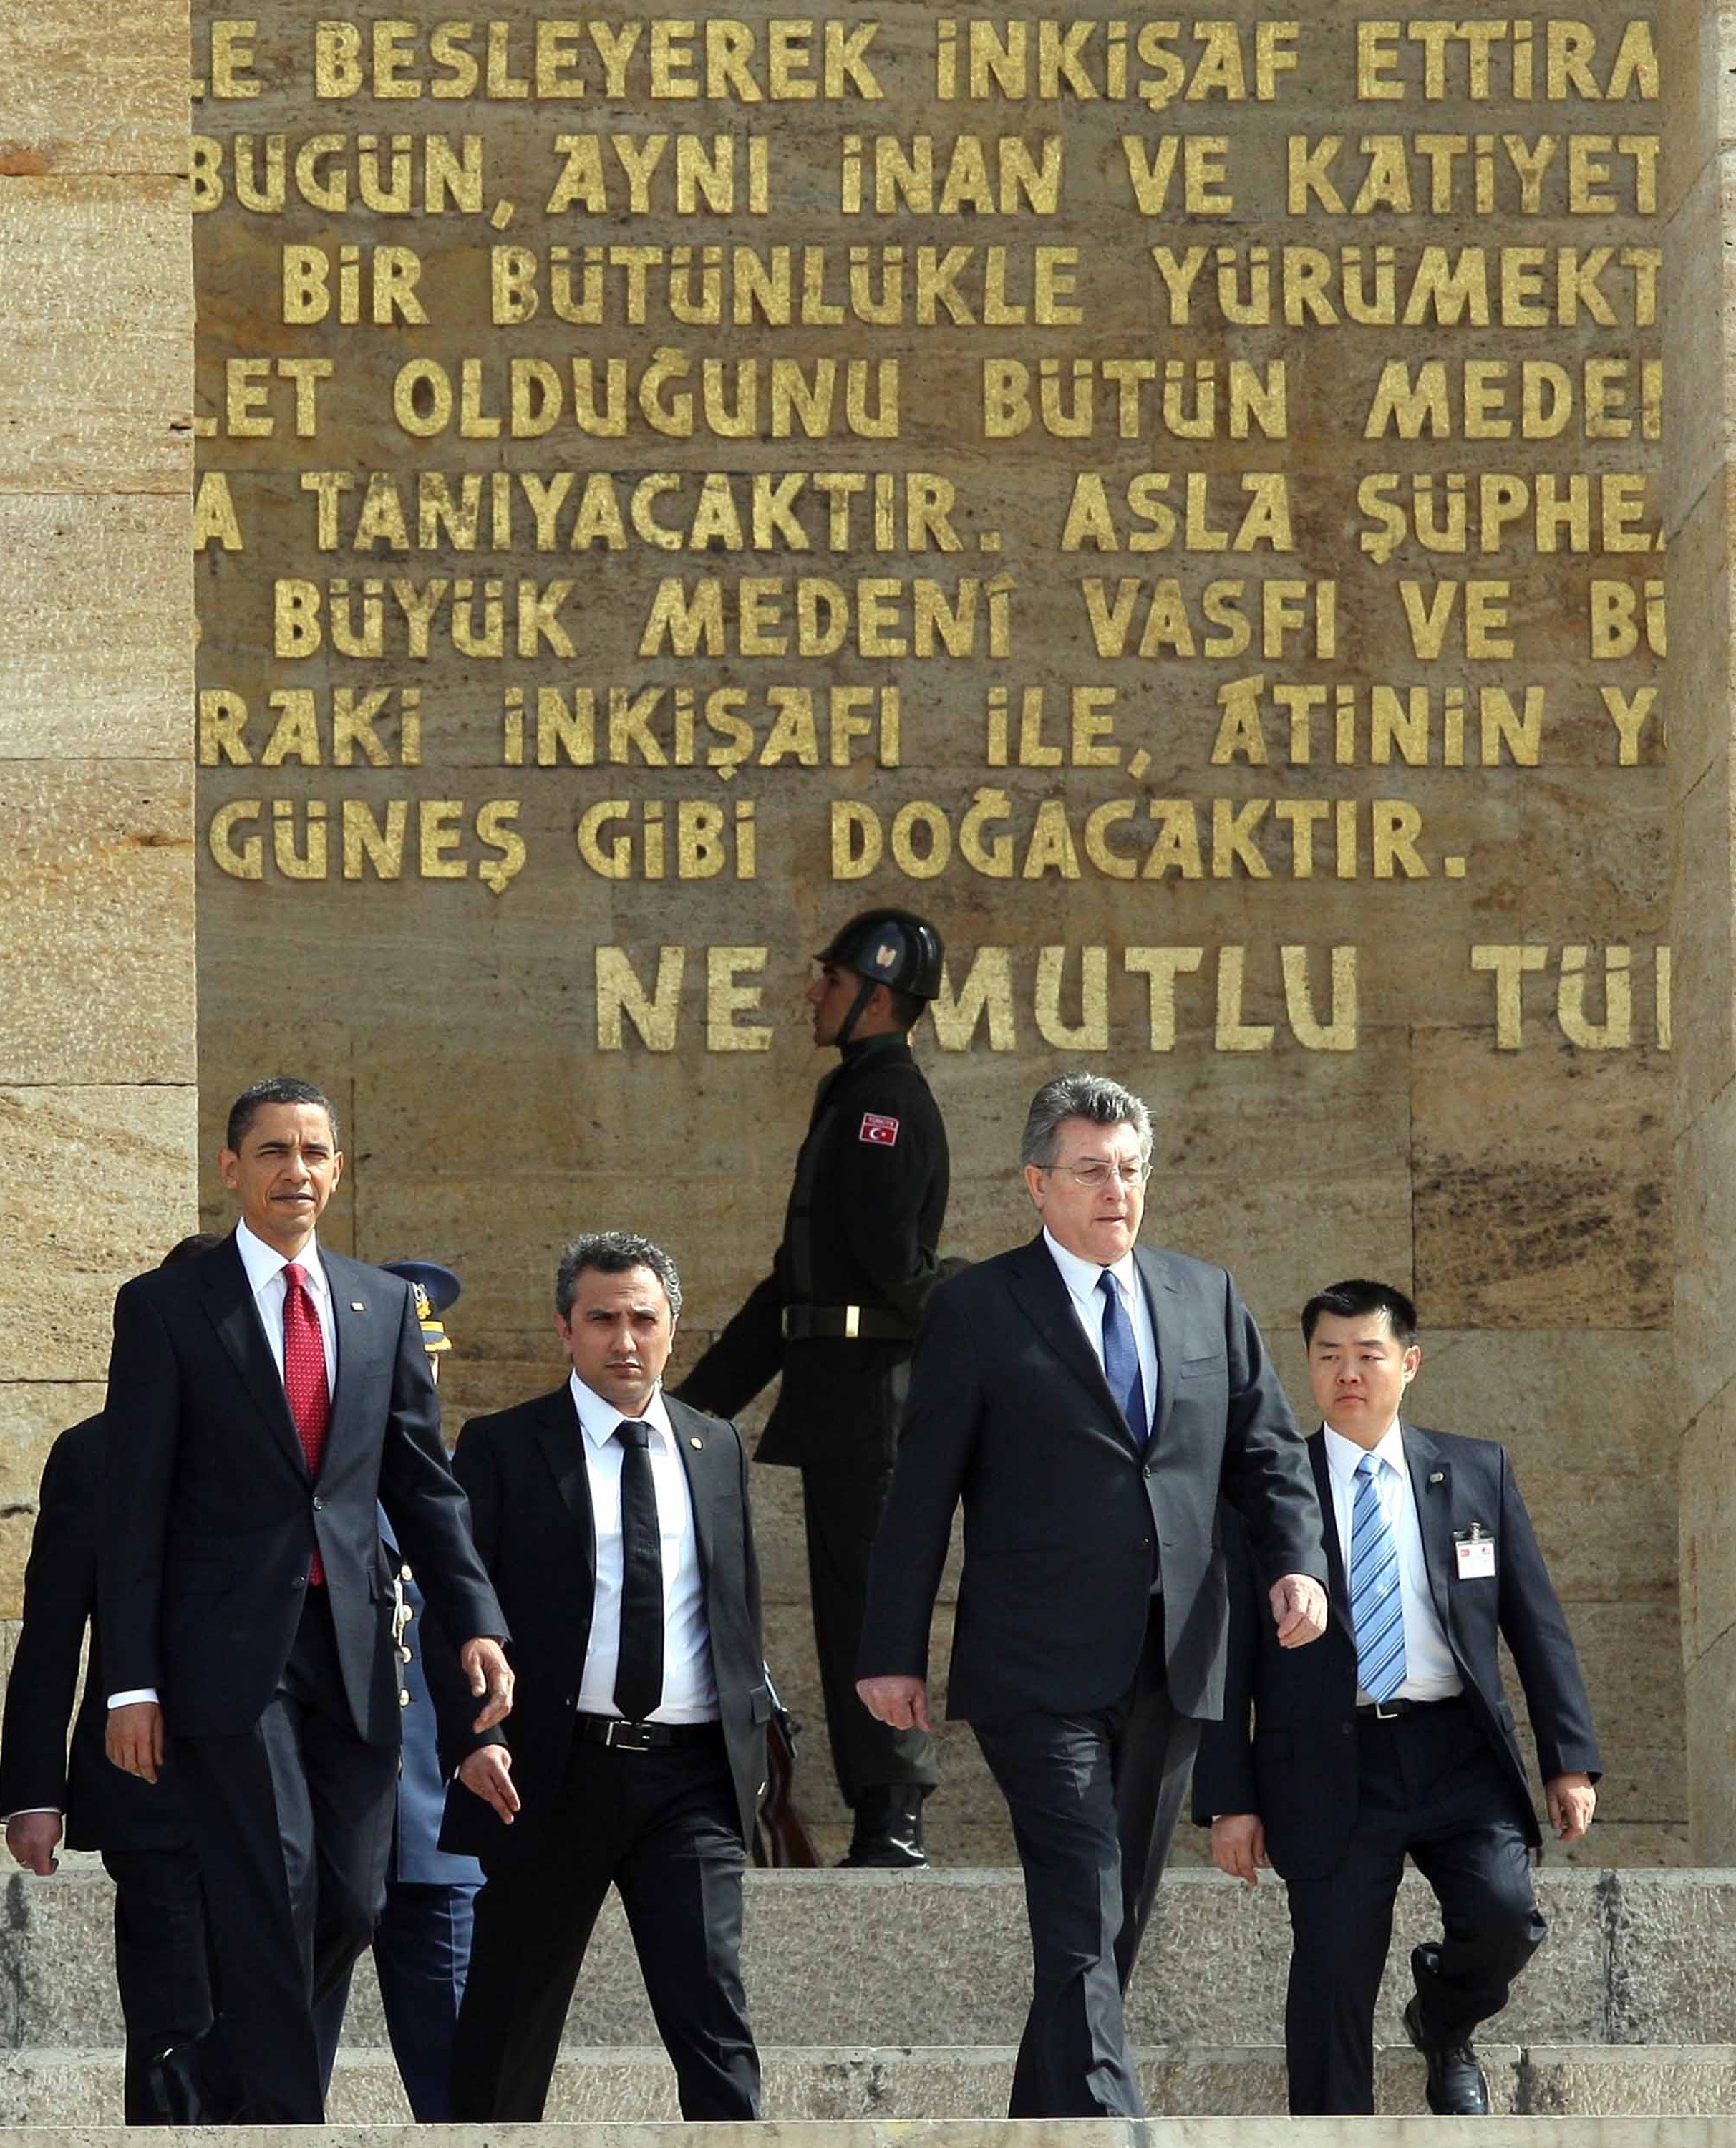 Getty Images. US President Barack Obama (L) attends a wreath-laying ceremony at the mausoleum of Mustafa Kemal Ataturk, founder of modern Turkey on April 6, 2009 in Ankara, Turkey. Obama is on a two-day visit to Turkey to revitalise links between Turkey and the United States and he has vocalised his support for the country's efforts to join the European Union.